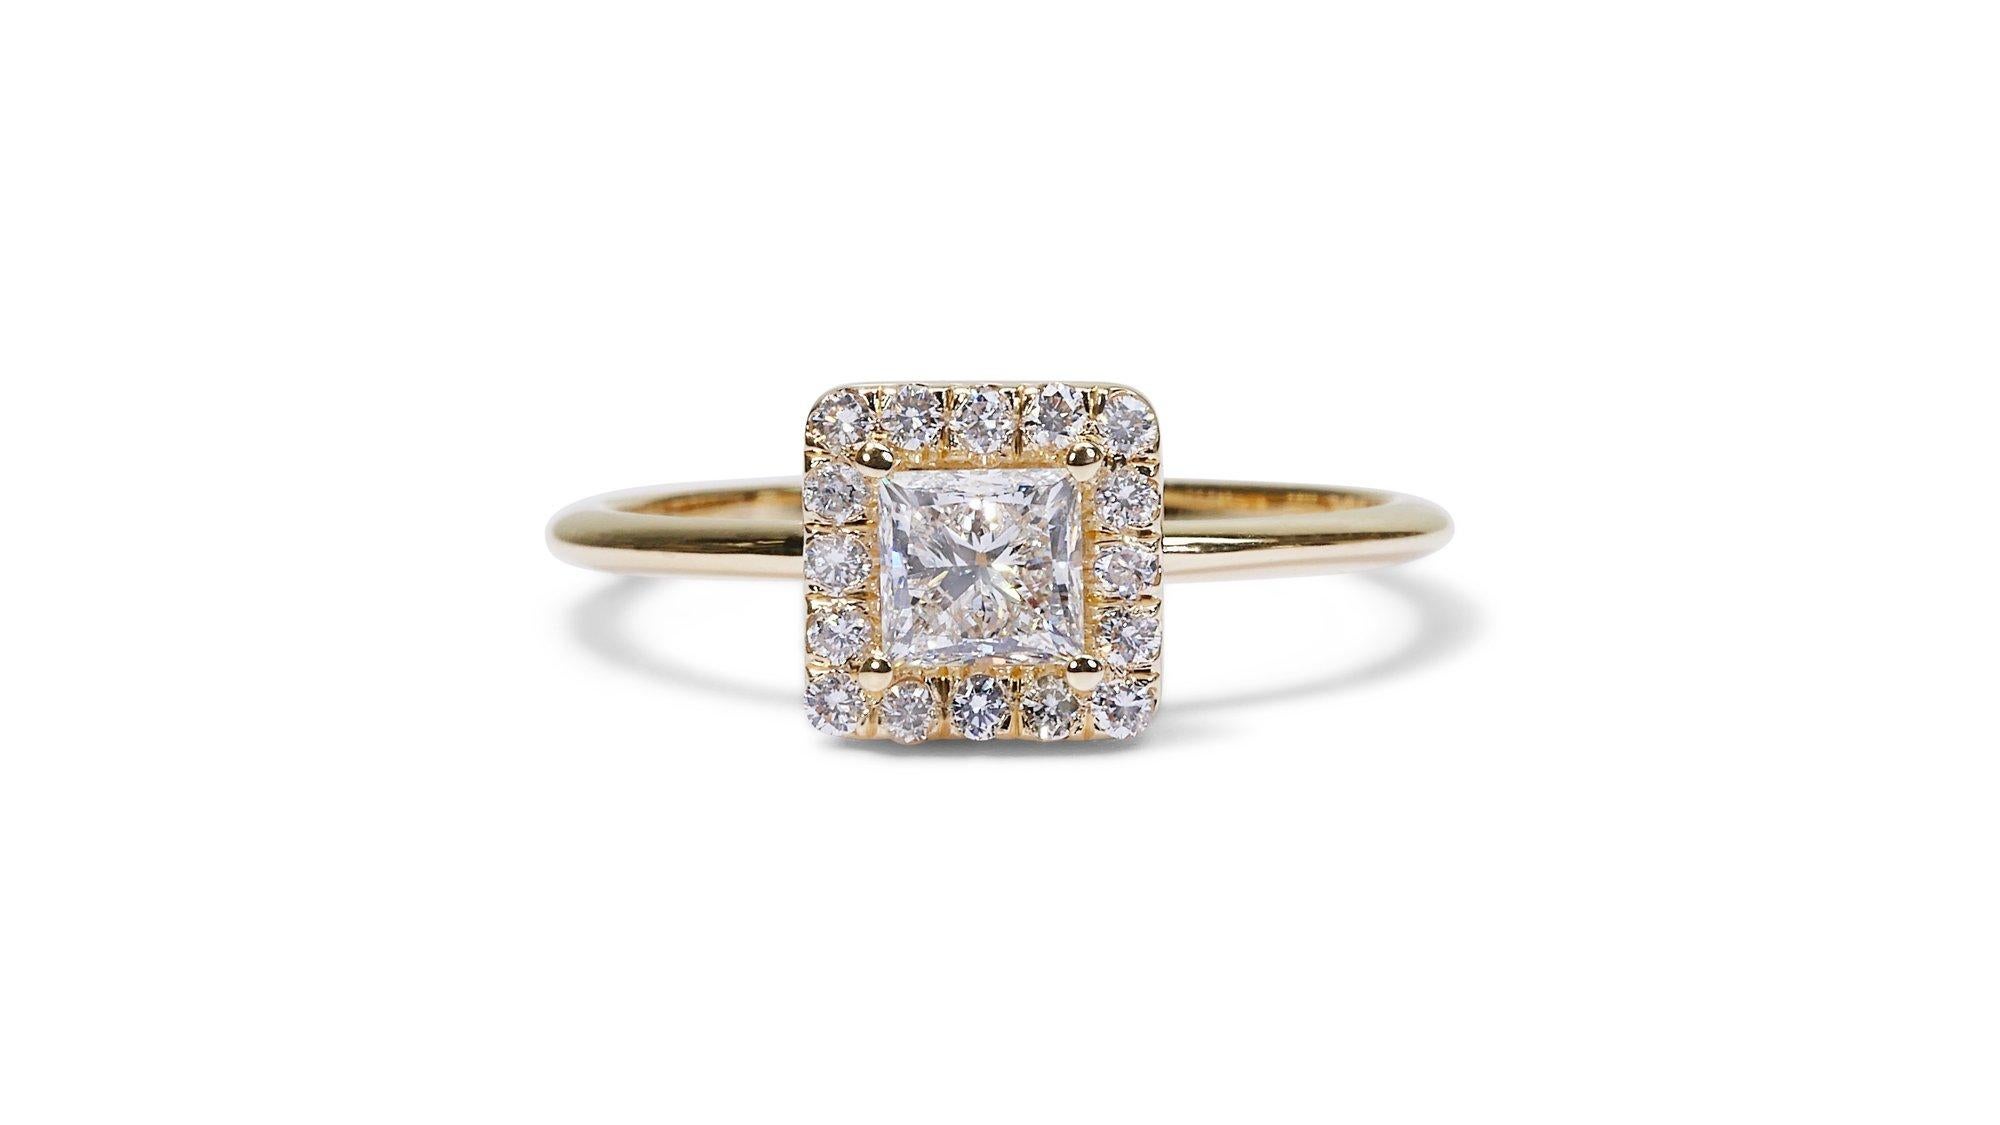 A beautiful Ring with a dazzling 0.5 carat Princess natural Diamond. It has 0.17 carat of side diamonds which add more to its elegance. The jewelry is made of 18k Yellow Gold with a high quality polish. It comes with AIG certificate and a fancy